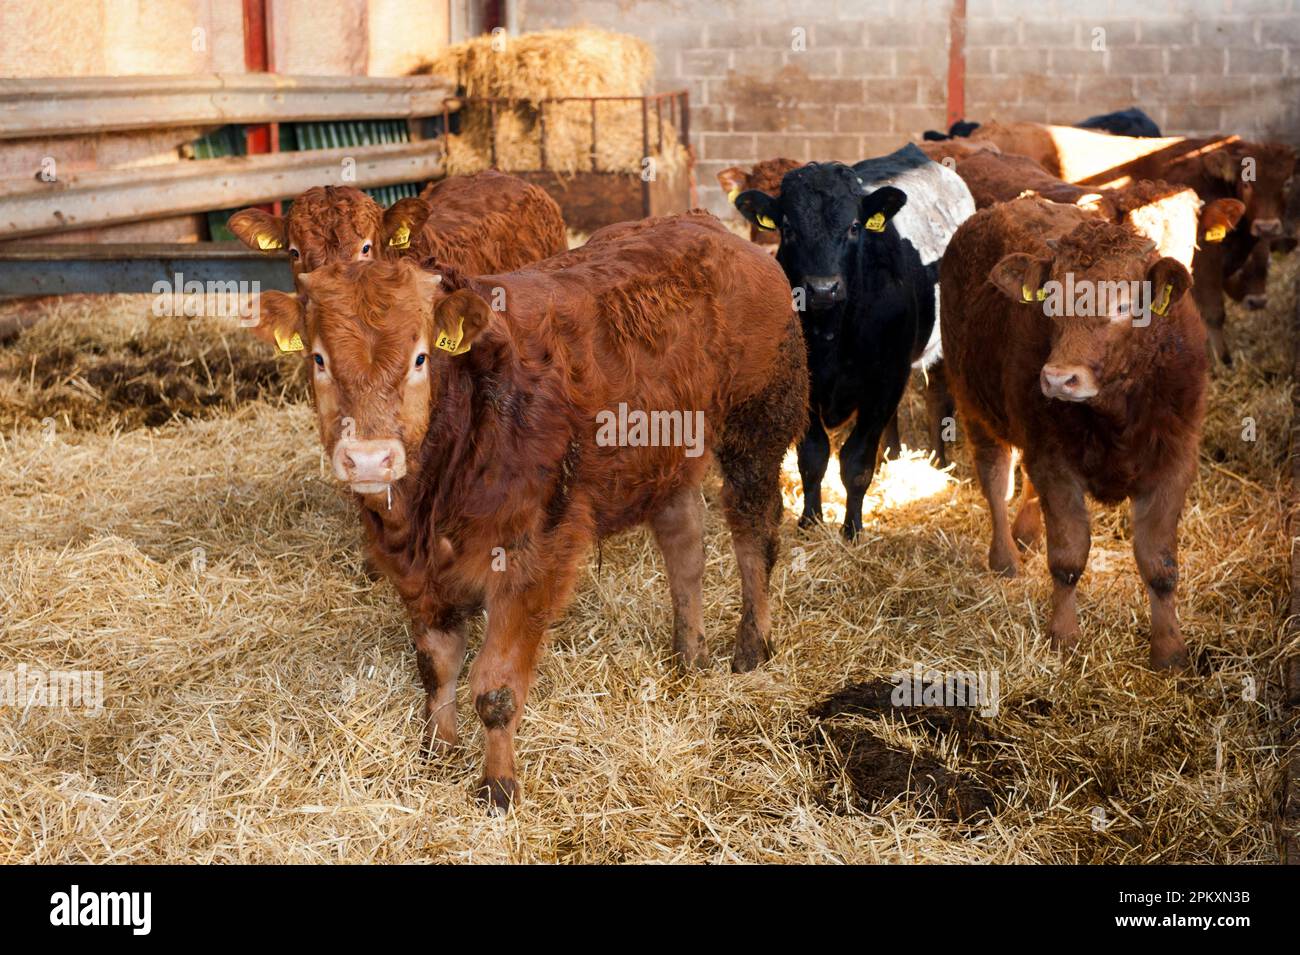 Domestic Cattle, young beef bulls, standing in straw bedded pen, Cumbria, England, United Kingdom Stock Photo